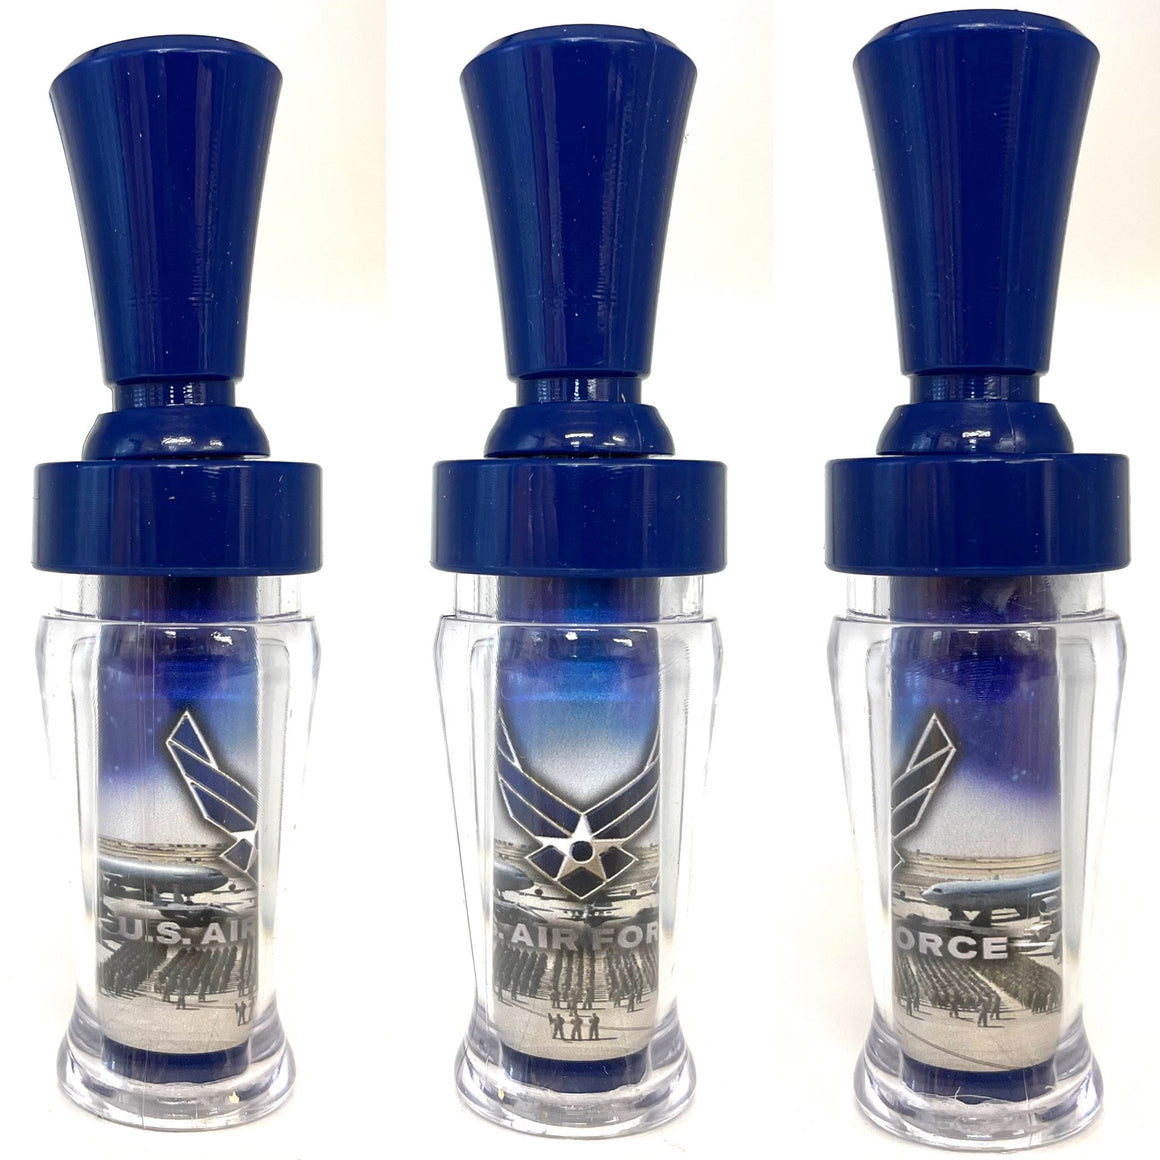 POLYCARBONATE IMAGE DUCK CALL AIR FORCE